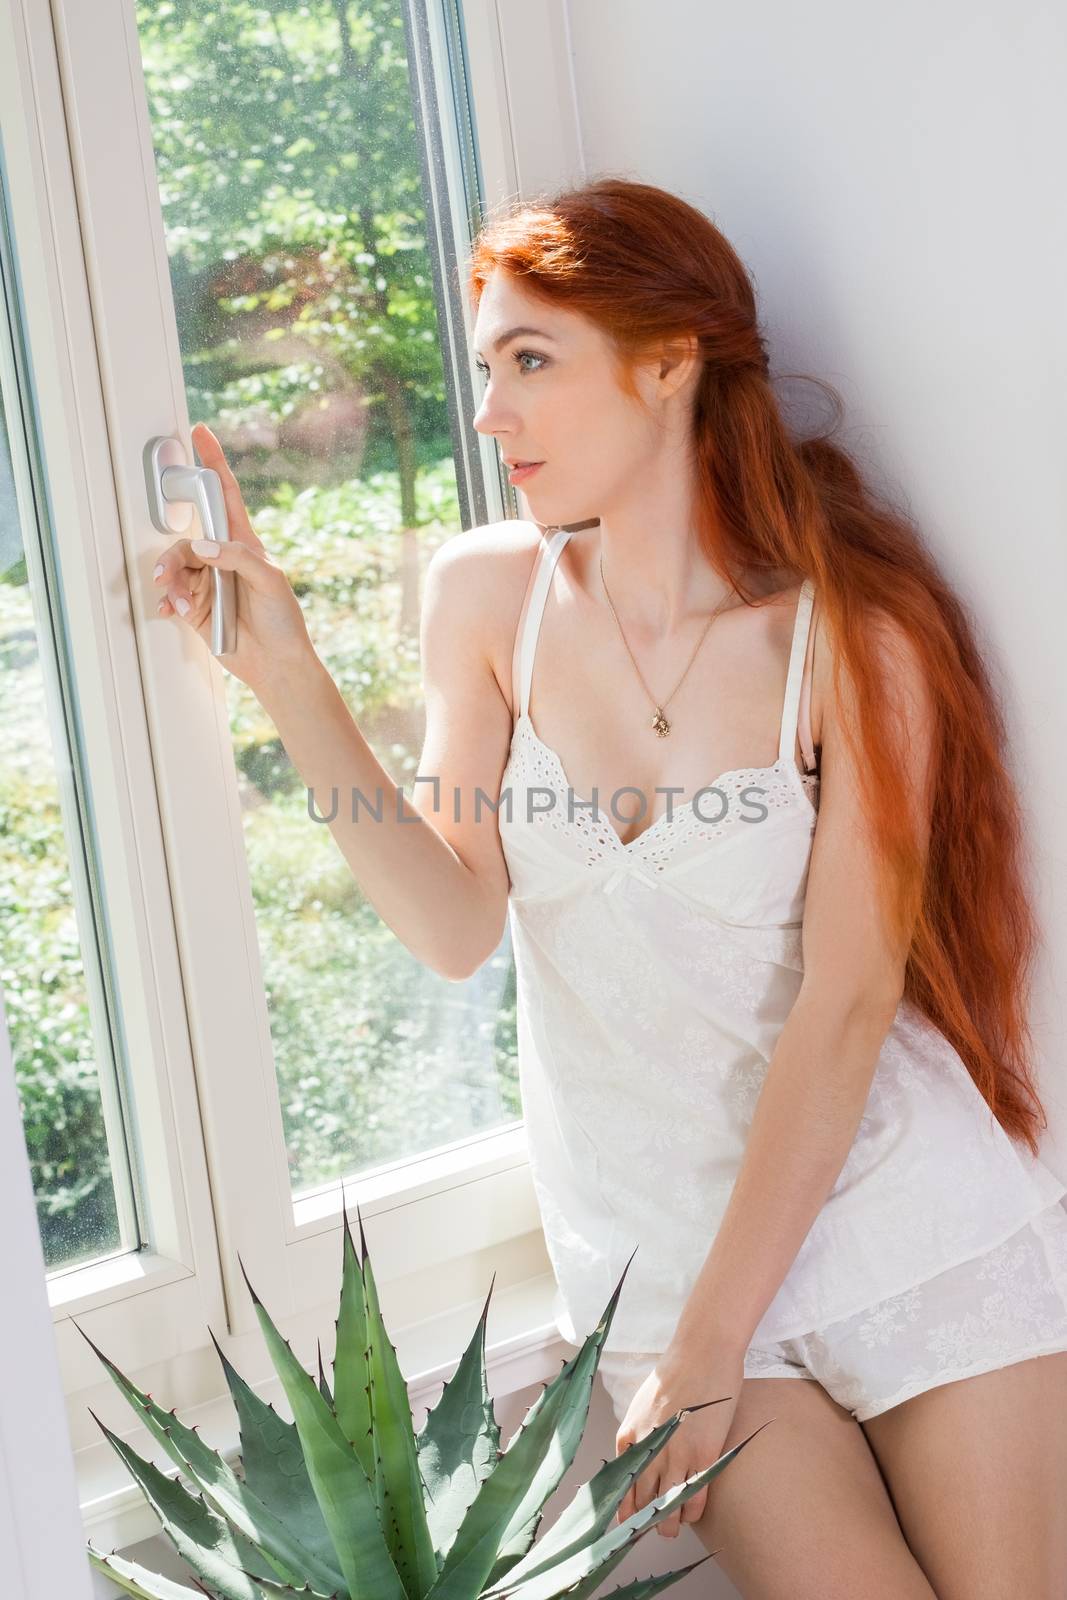 Thoughtful Pretty Young Woman with Long Blond Hair, Wearing White Night Wear, Sitting at the Glass Window While Looking Into Distance at Early in the Morning.